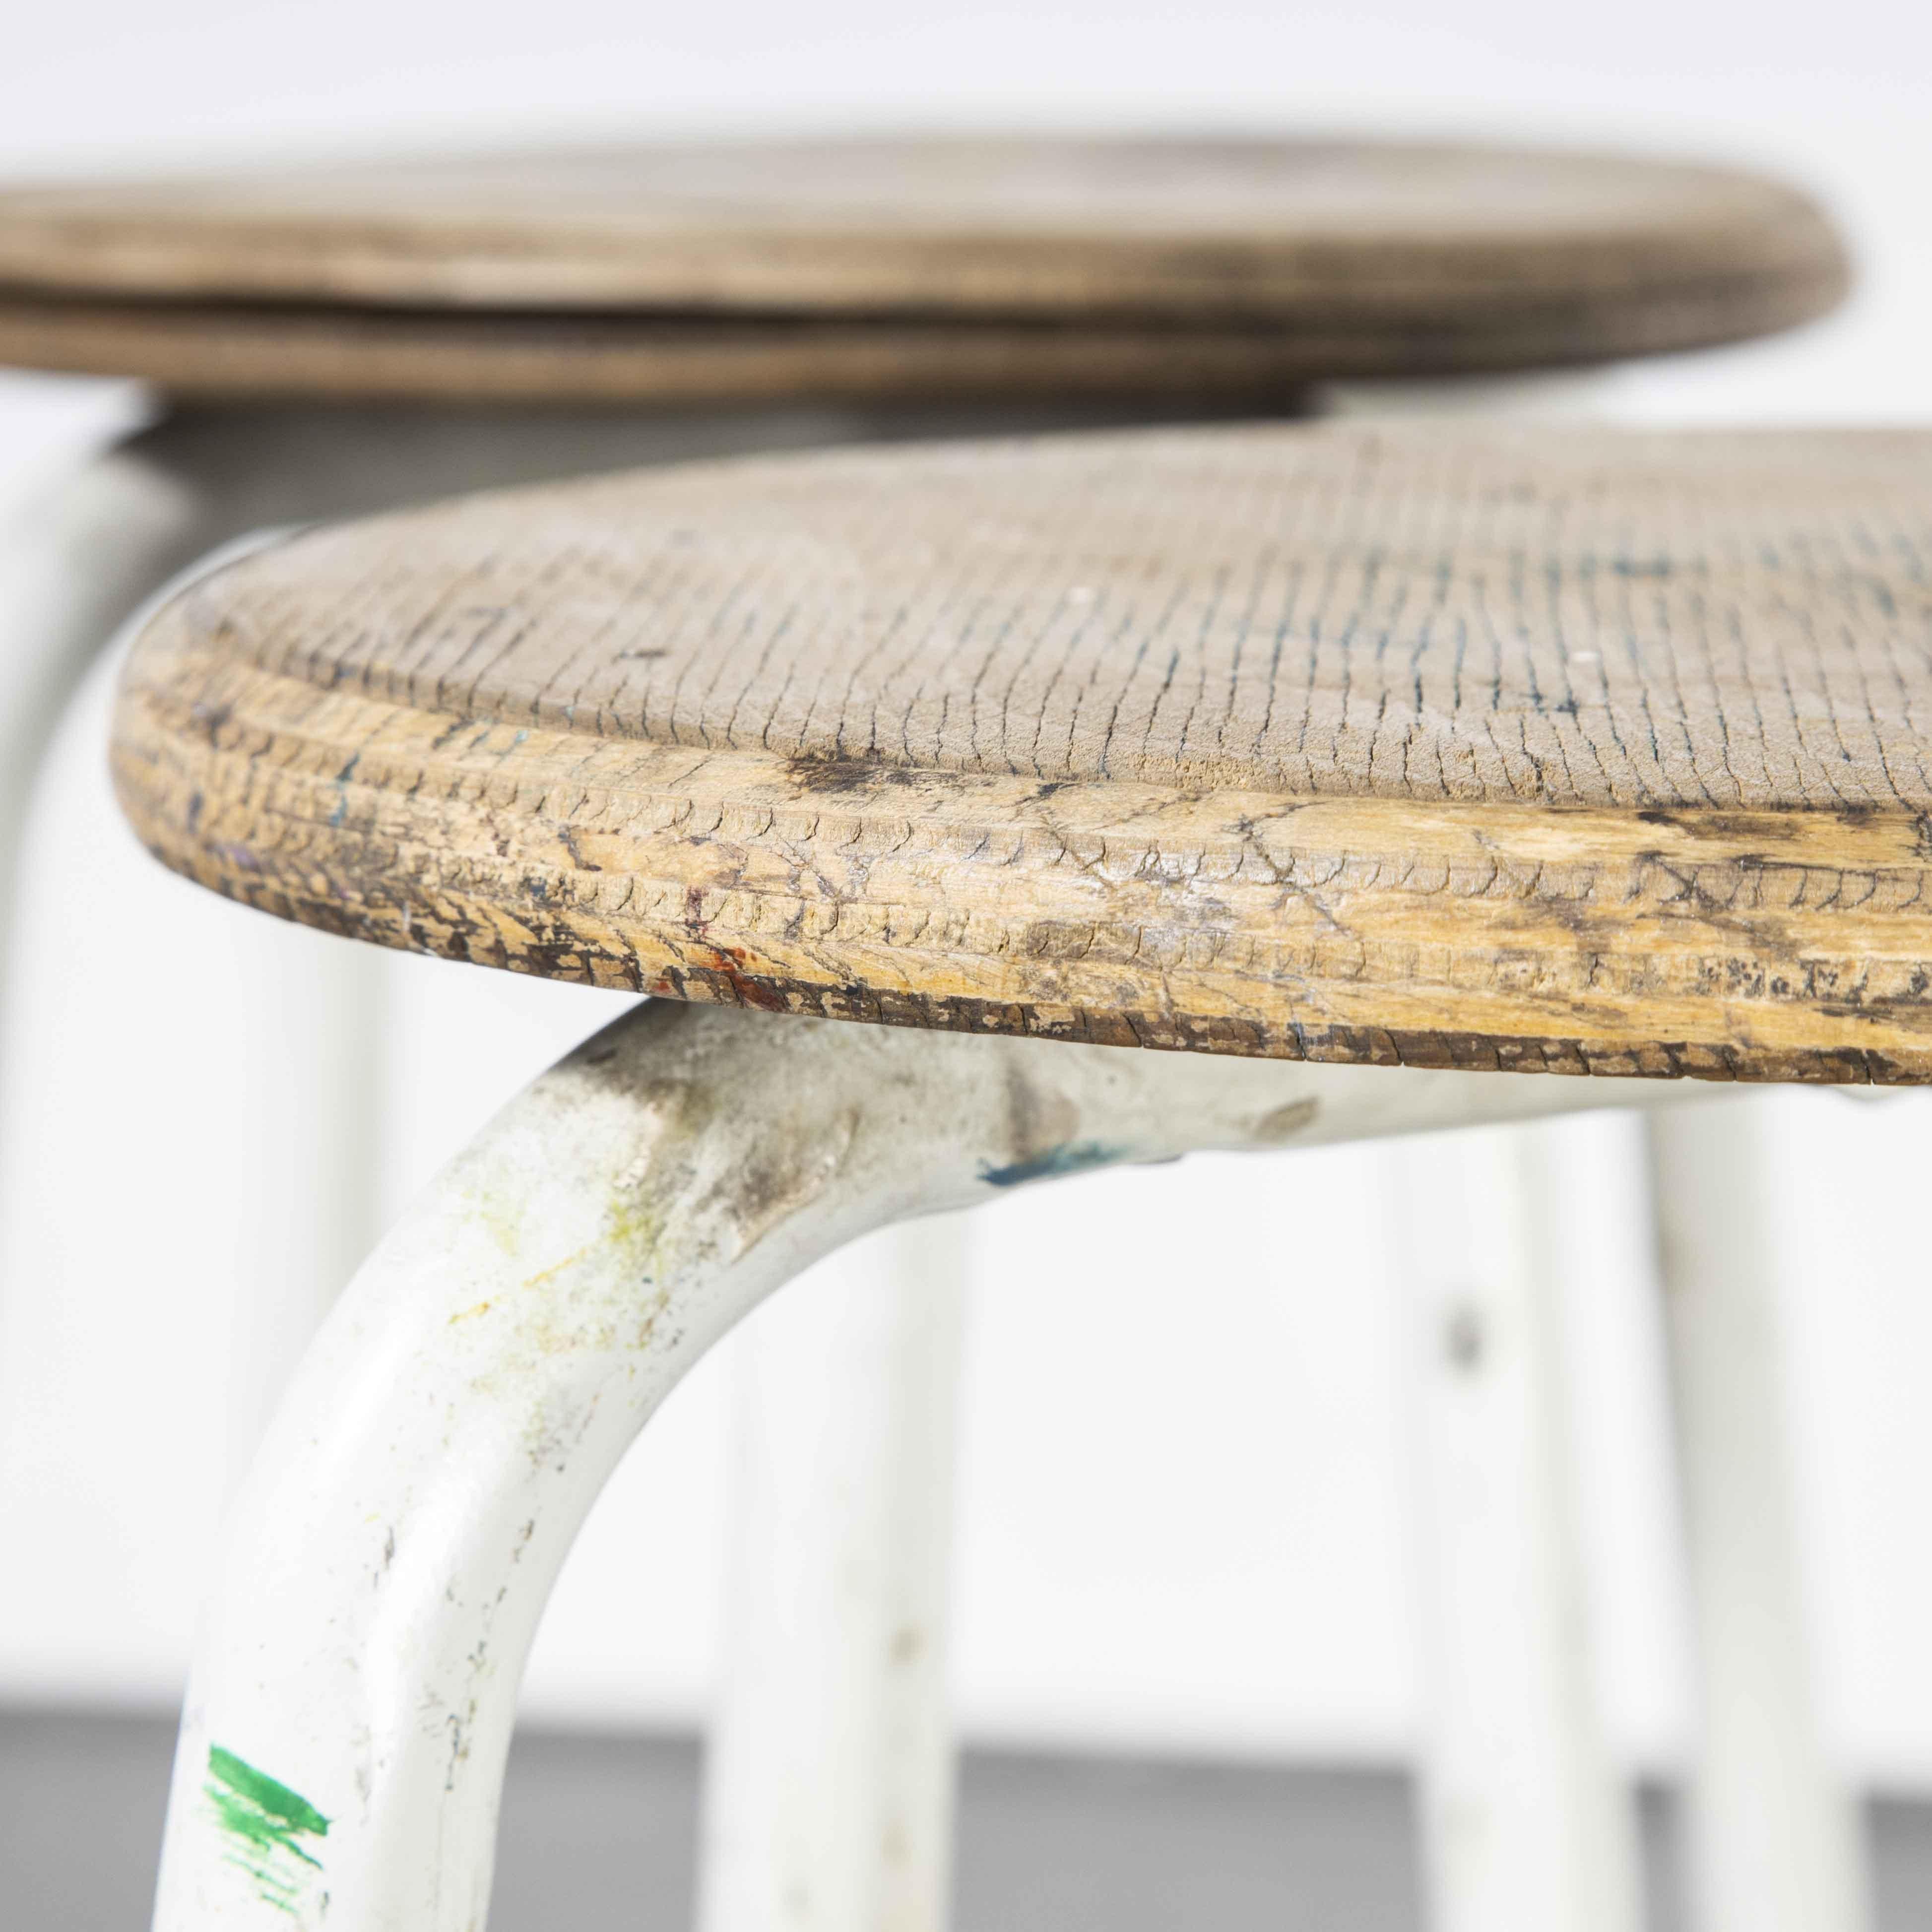 1960’s french tall white laboratory stools – Pair

1960’s french tall white laboratory stools – Pair. Good honest lab stools, heavy steel frames with solid heavy birch ply seats. We clean them and check all fixings, they are good to go. Seat